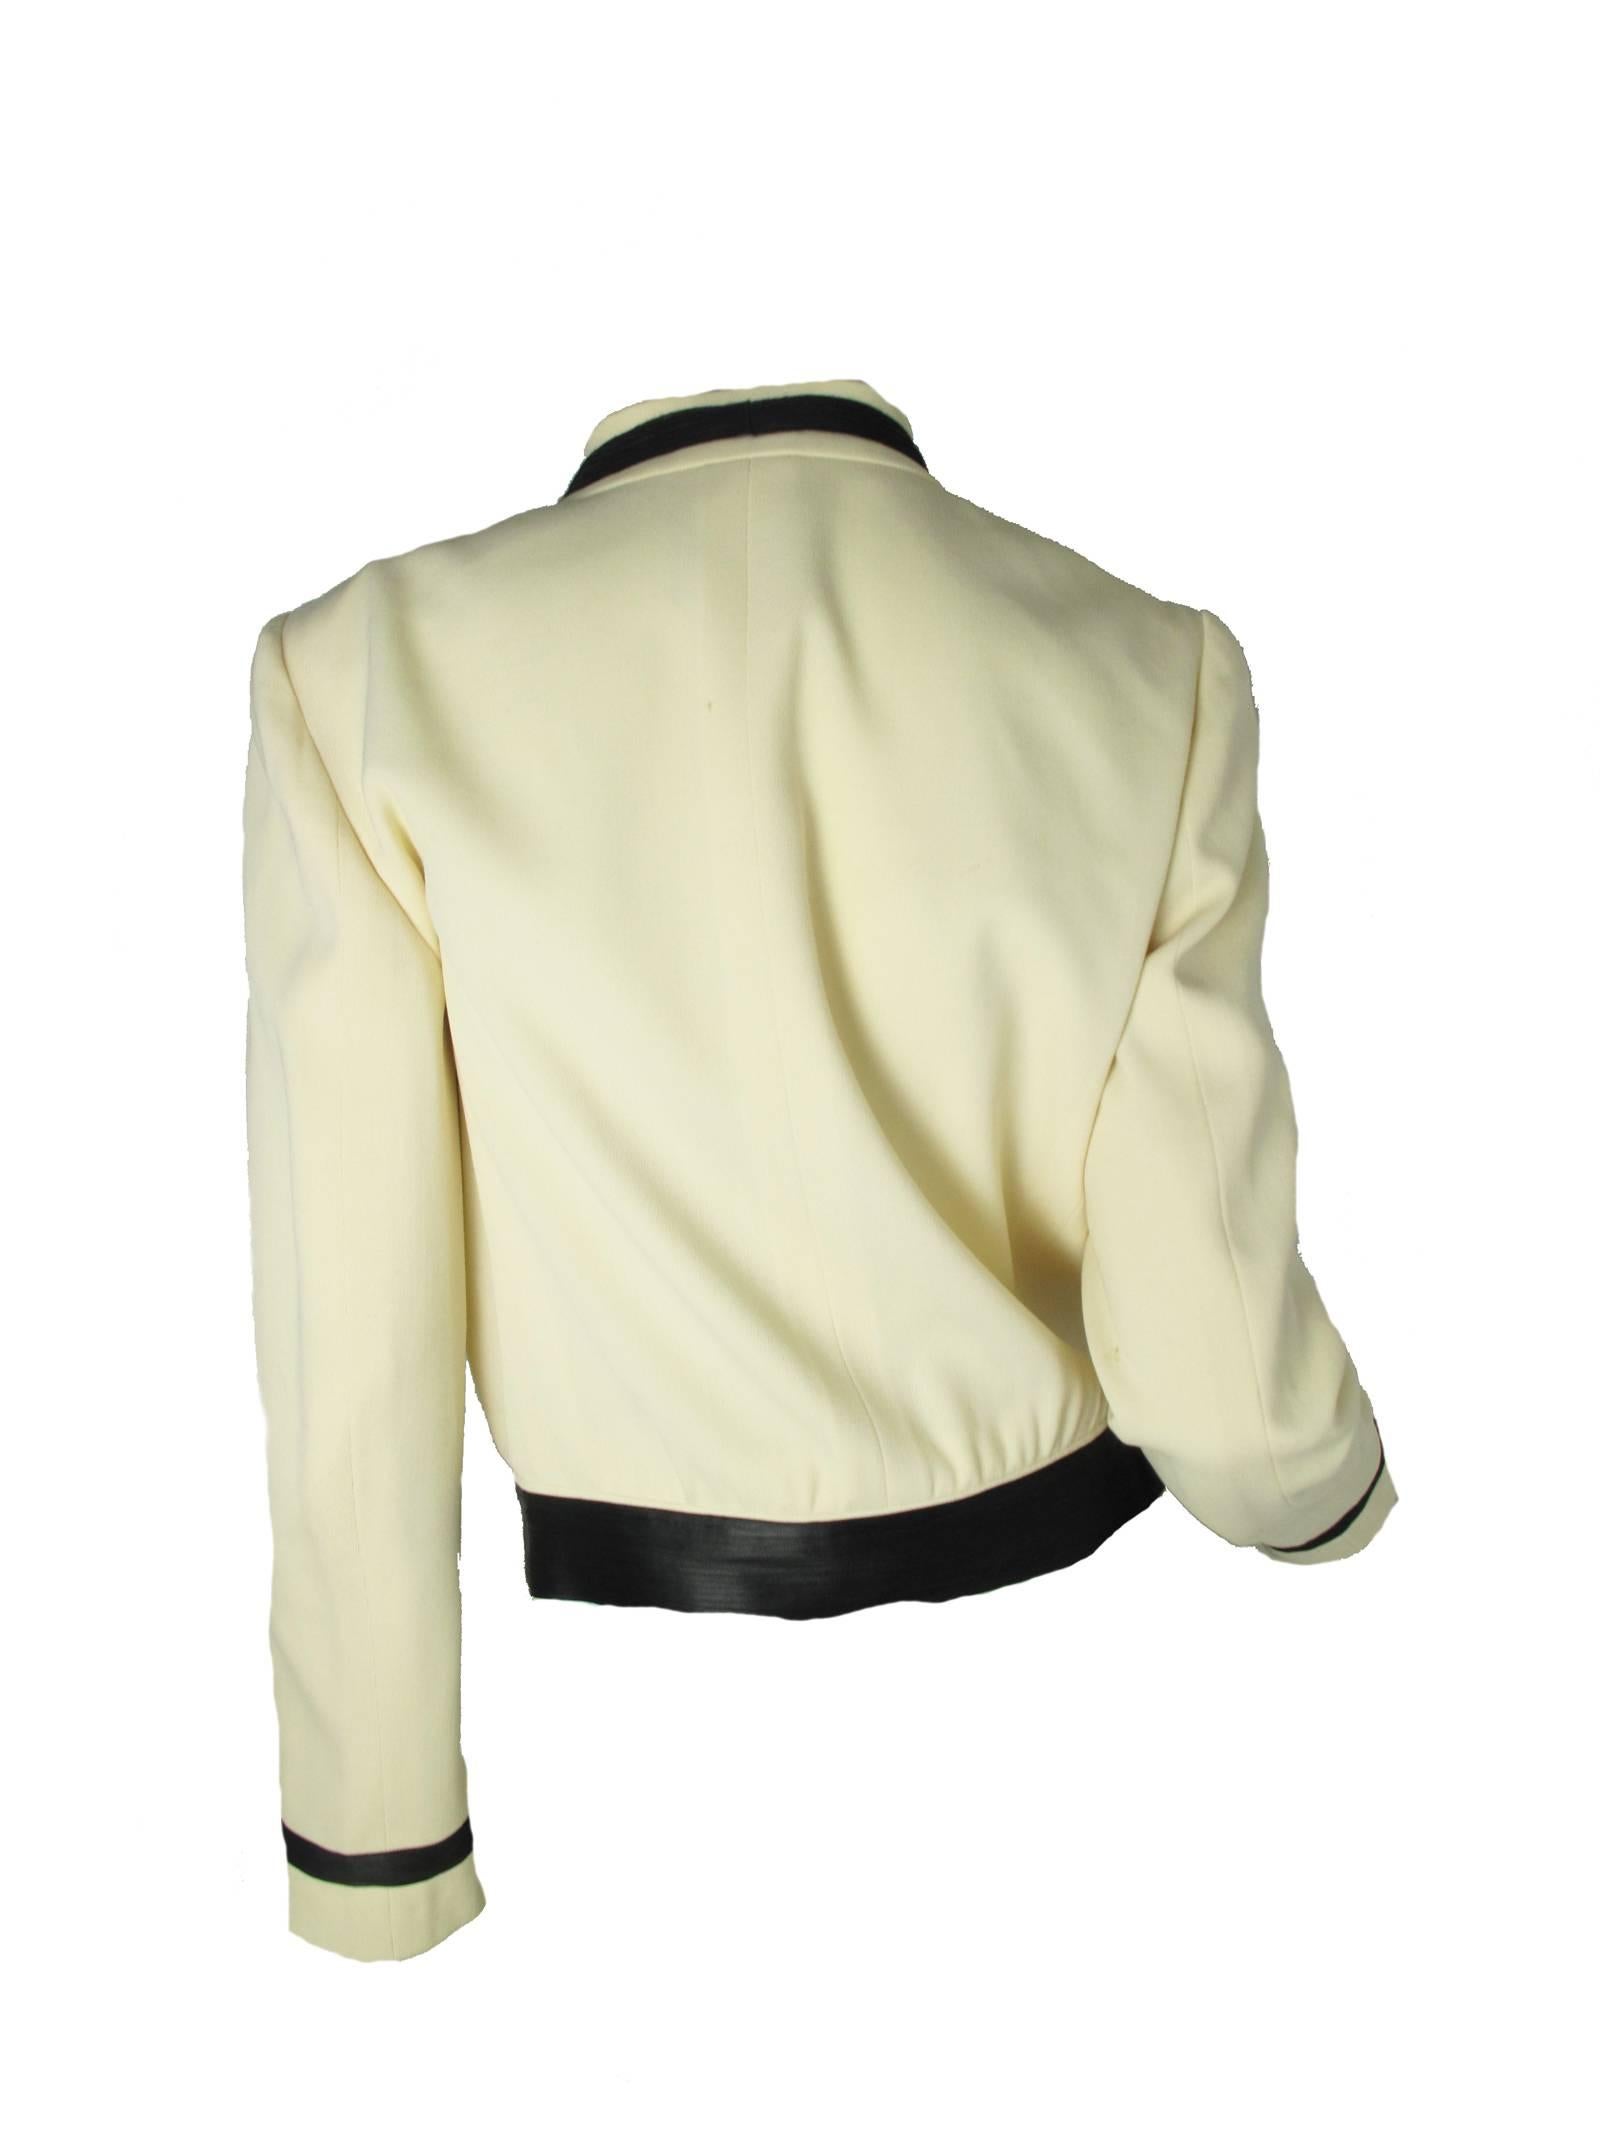 2002 Chanel jacket, cream wool gabardine, black ribbon trim, pearl and black buttons, military feel. Silk lined. Condition: Good, some underarm discoloration.   Made in France. Size 40/ US 8 

38" bust, 31" waist, 25 1/2" sleeve,15